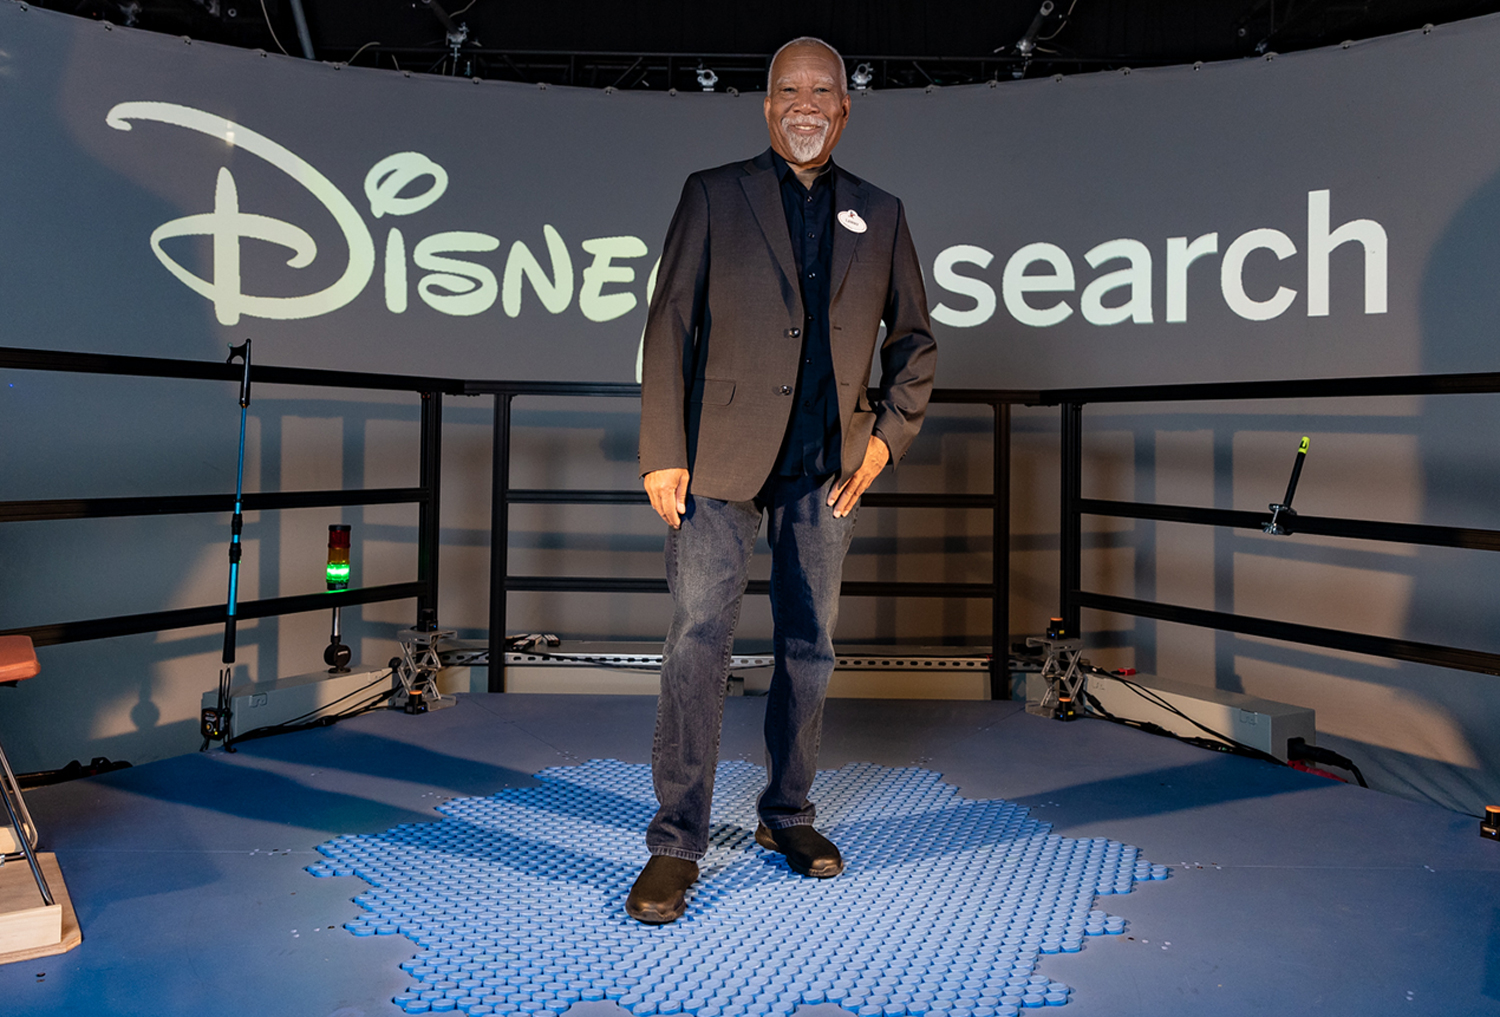 Lanny Smoot stands on a platform in front of a sign reading Disney Research.